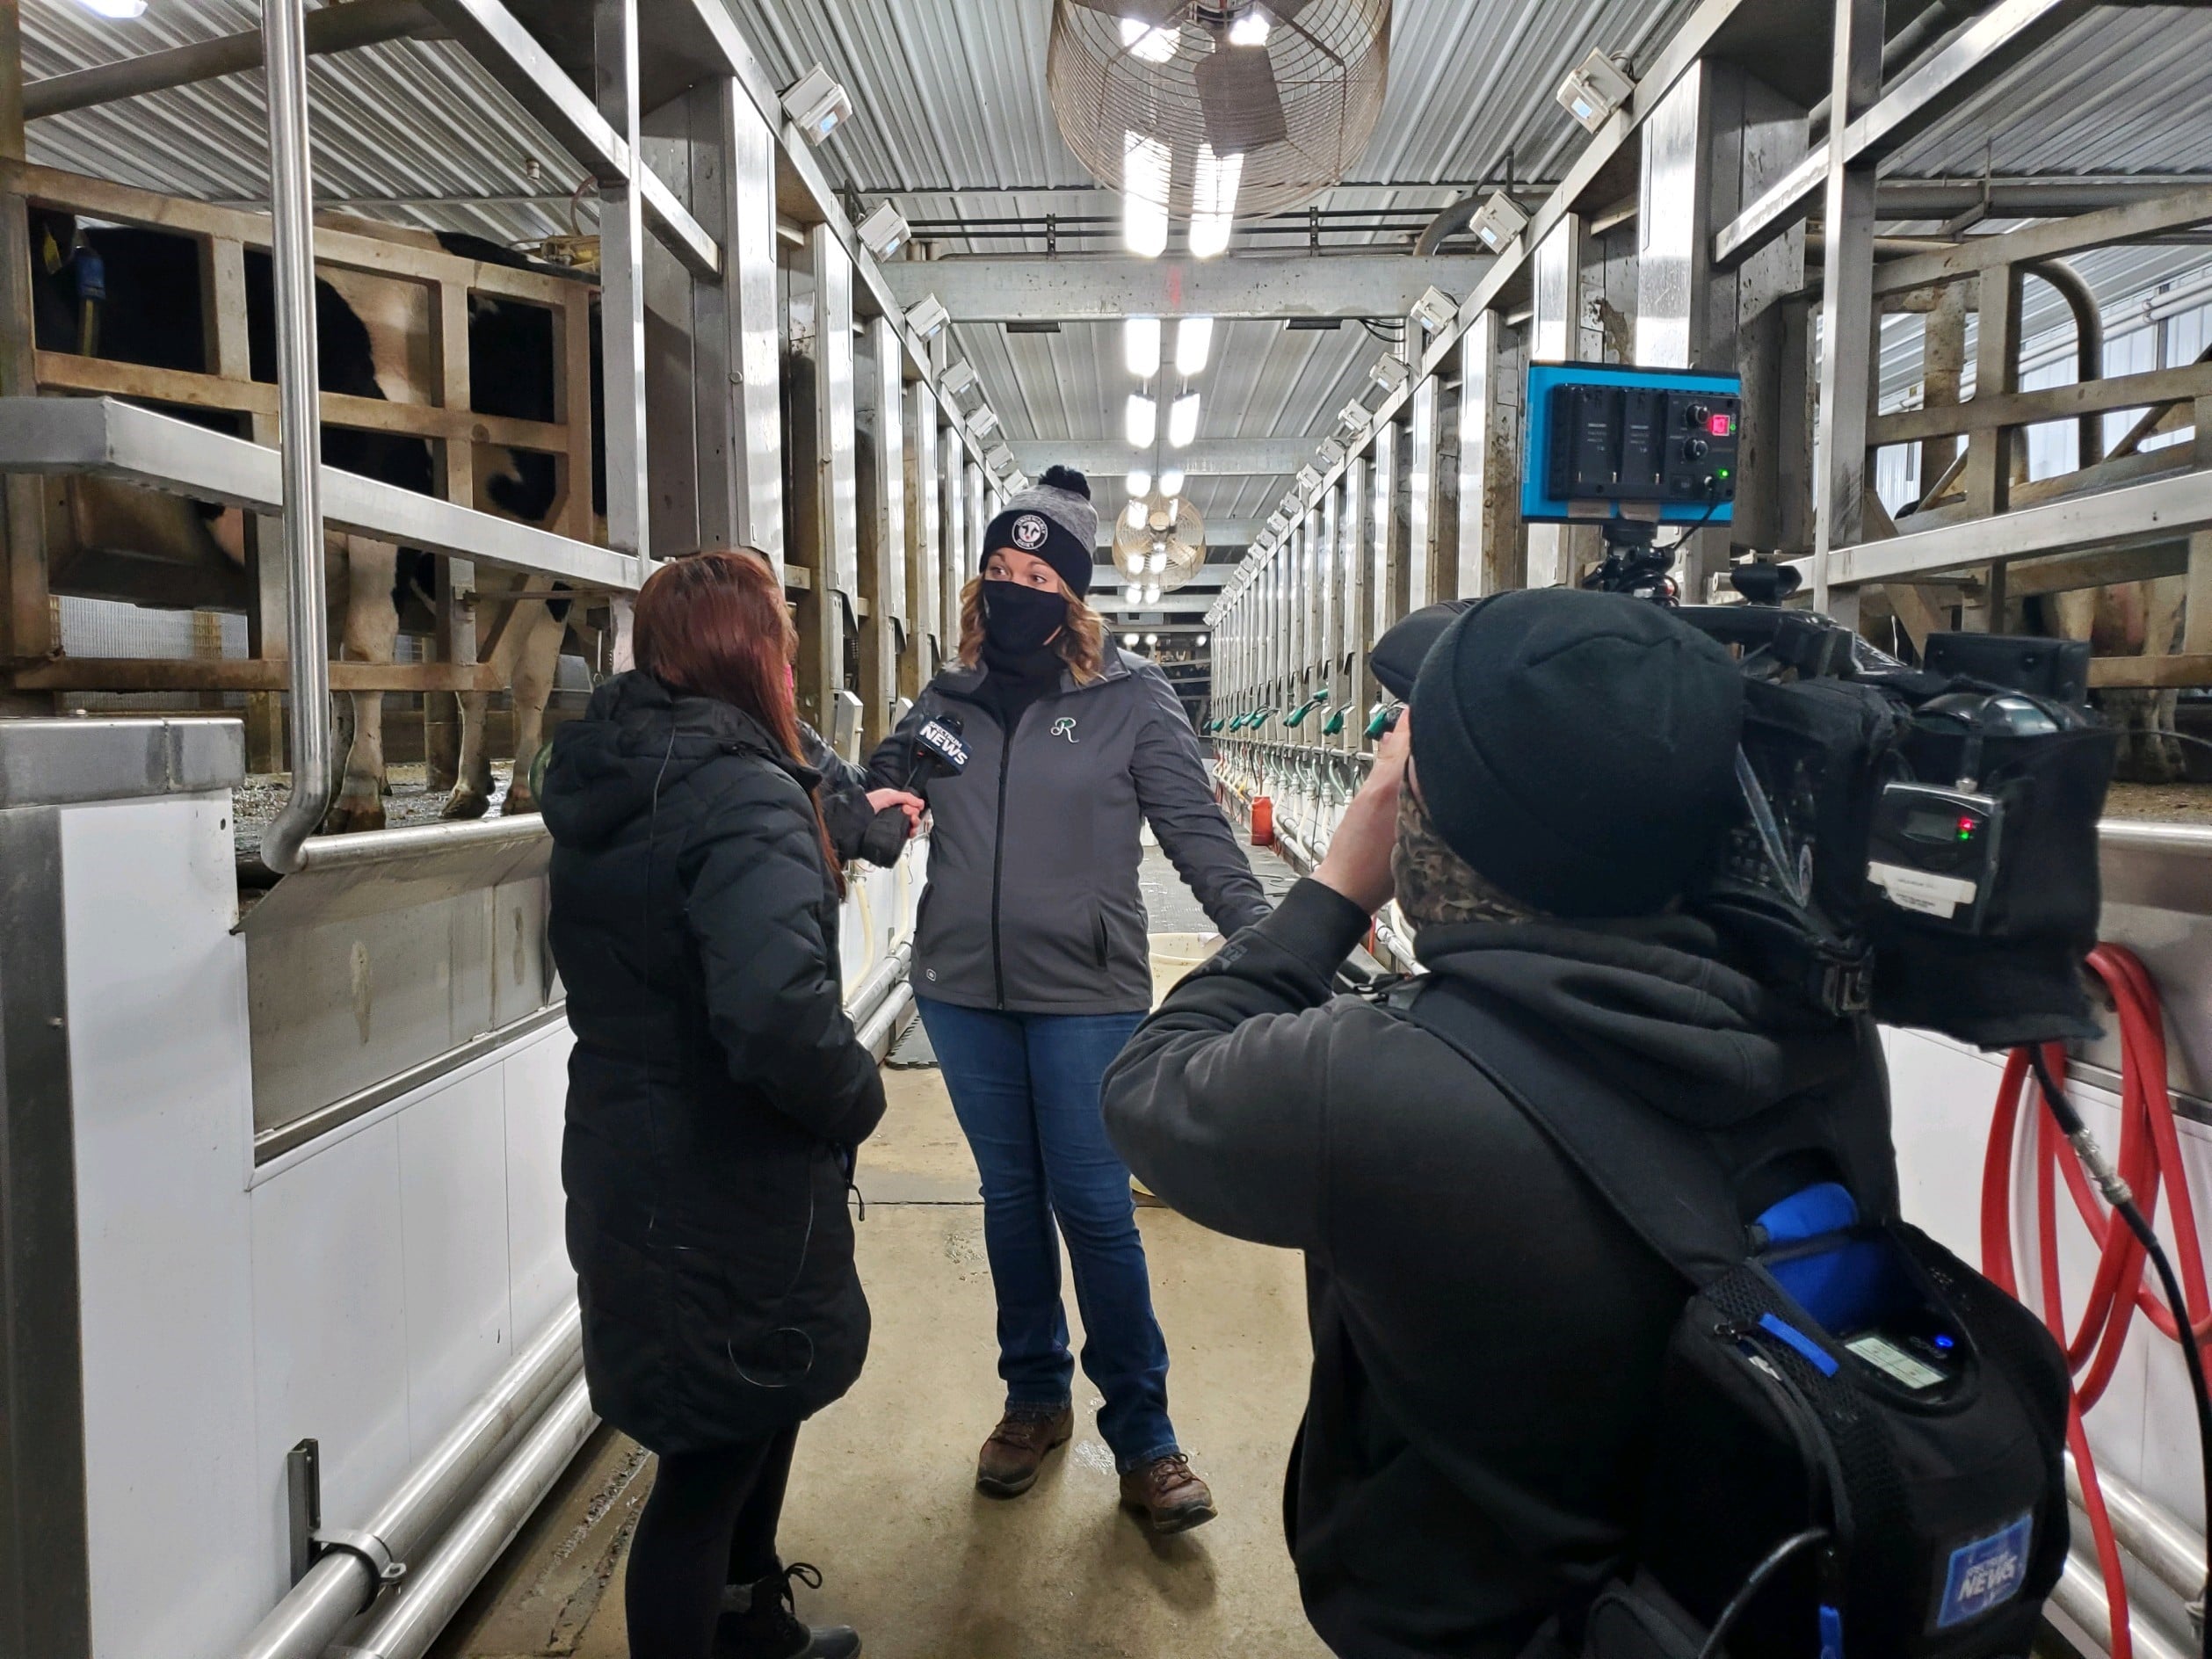 Local Media Outlets Seek Interviews with Dairy Farmers to Tell Their Stories